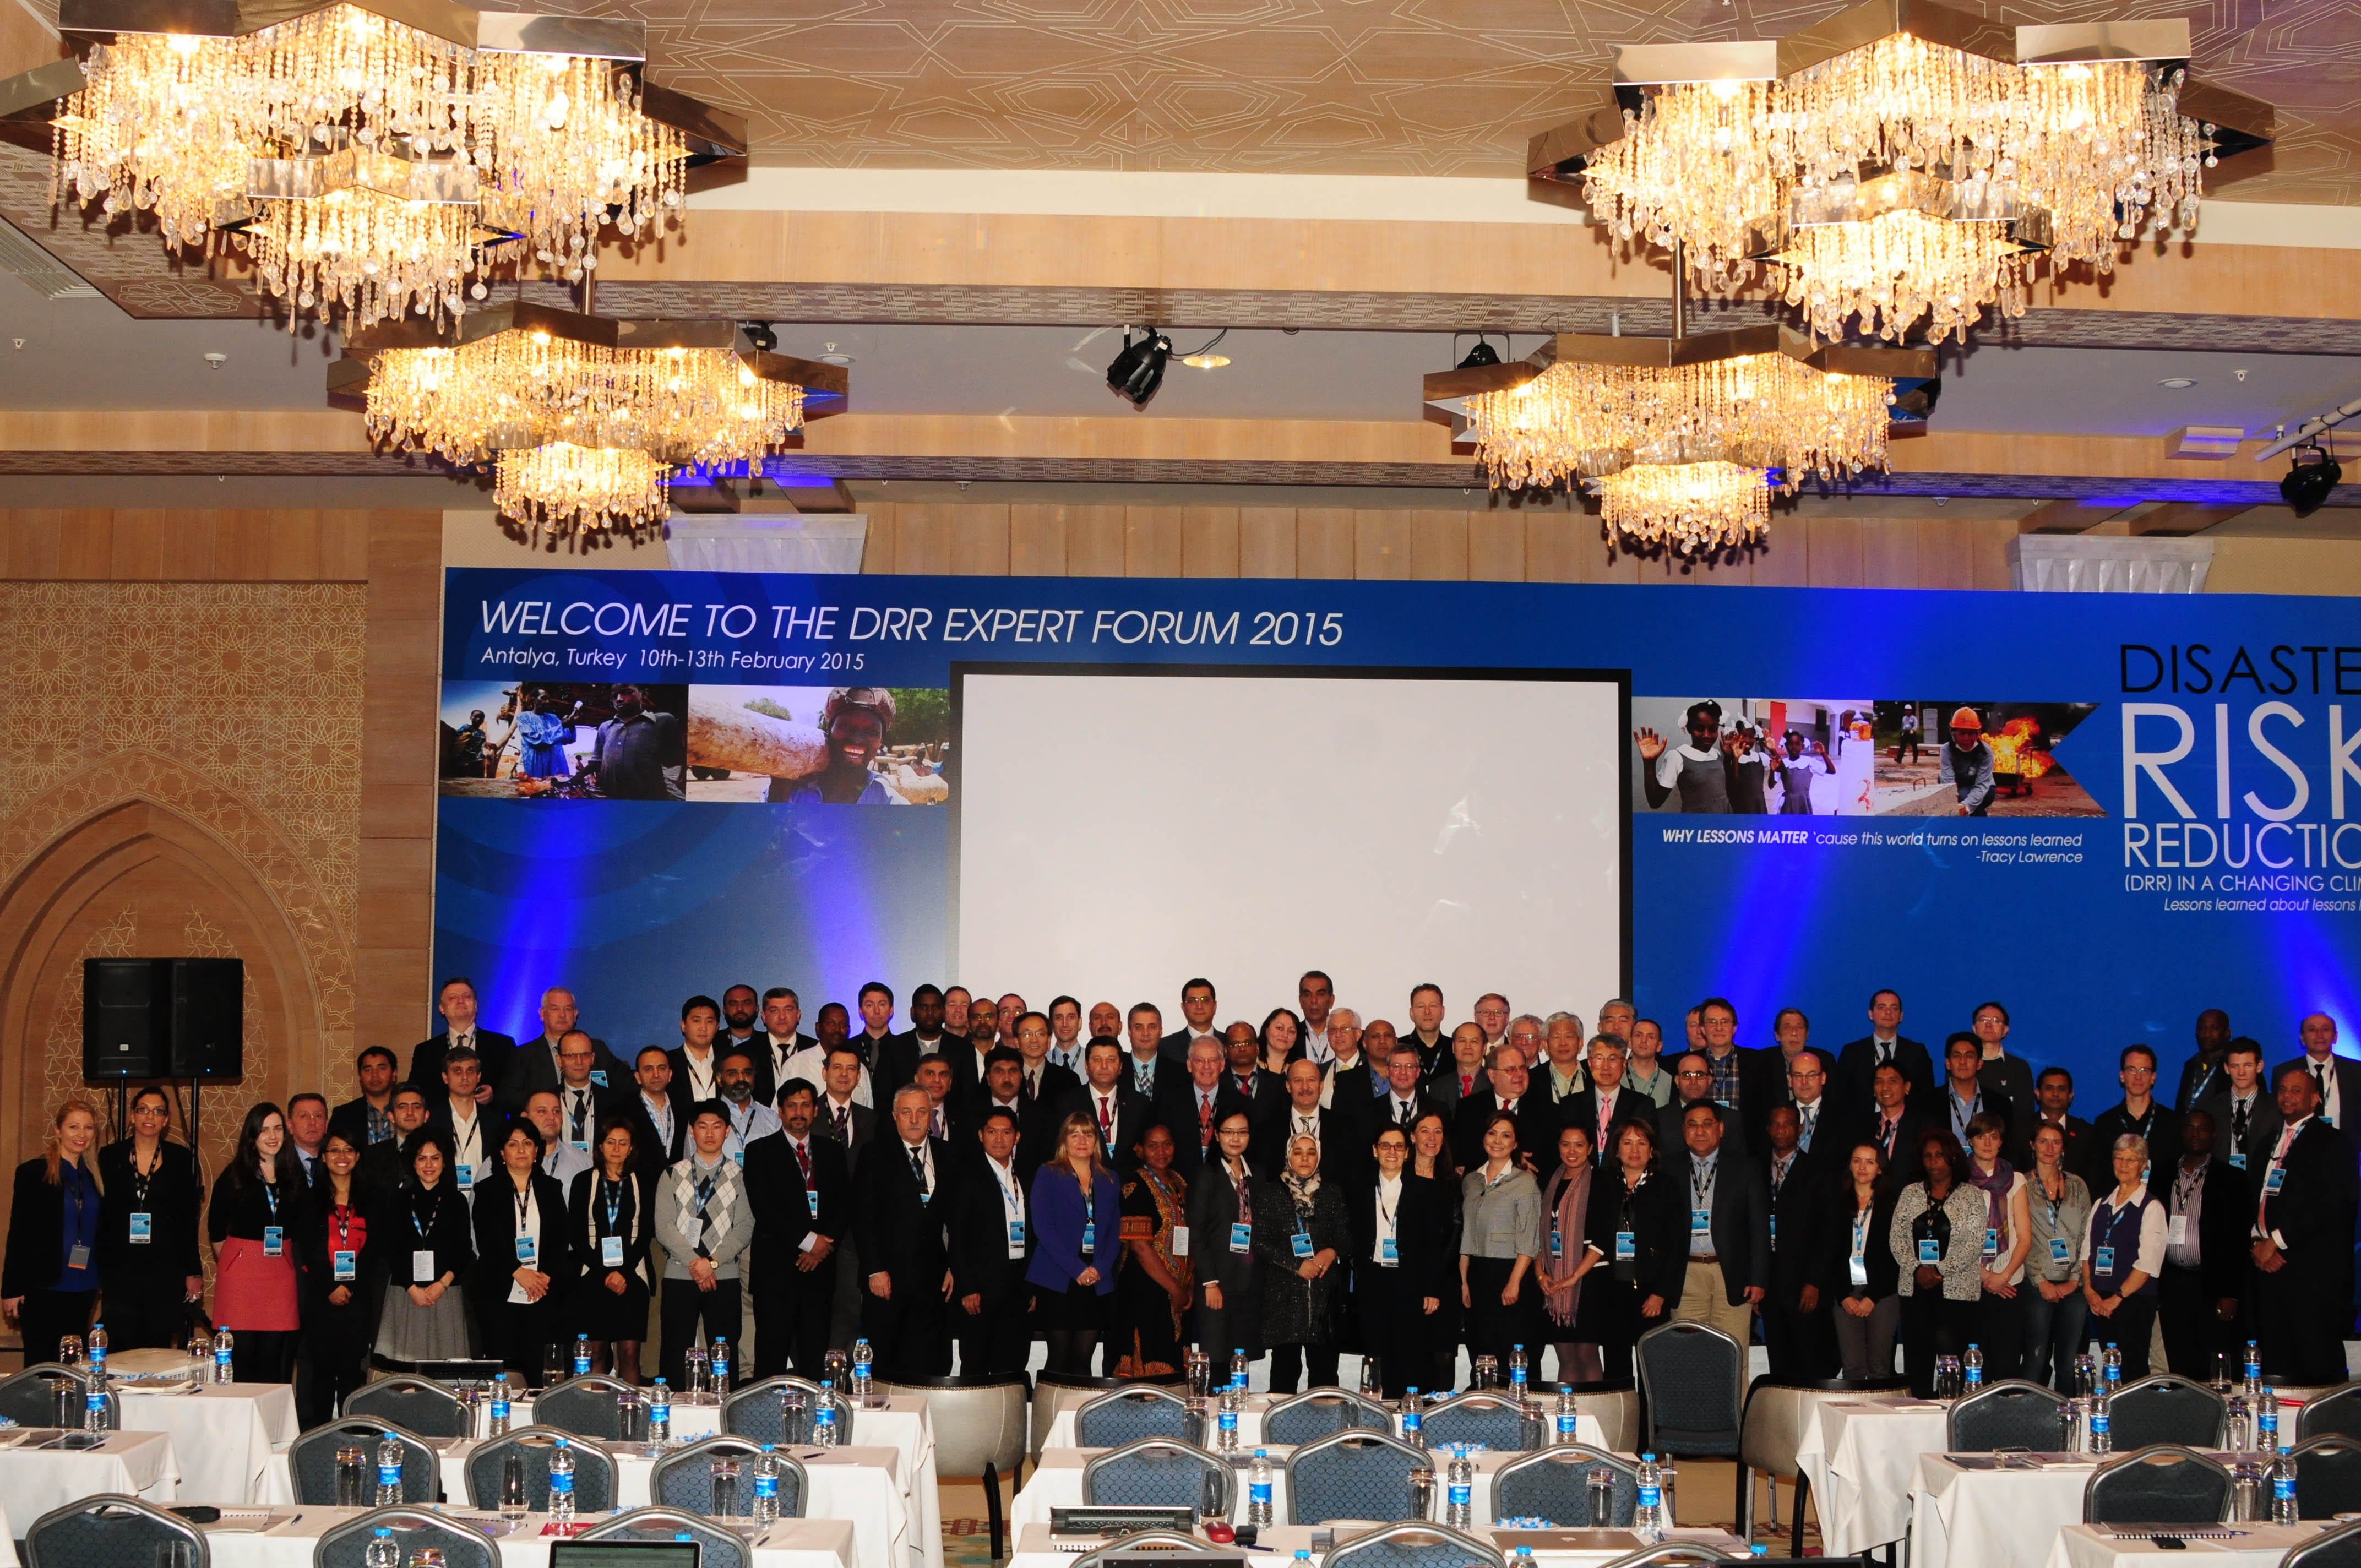 DRR Expert Forum 2015 and the Resulting Antalya Statement